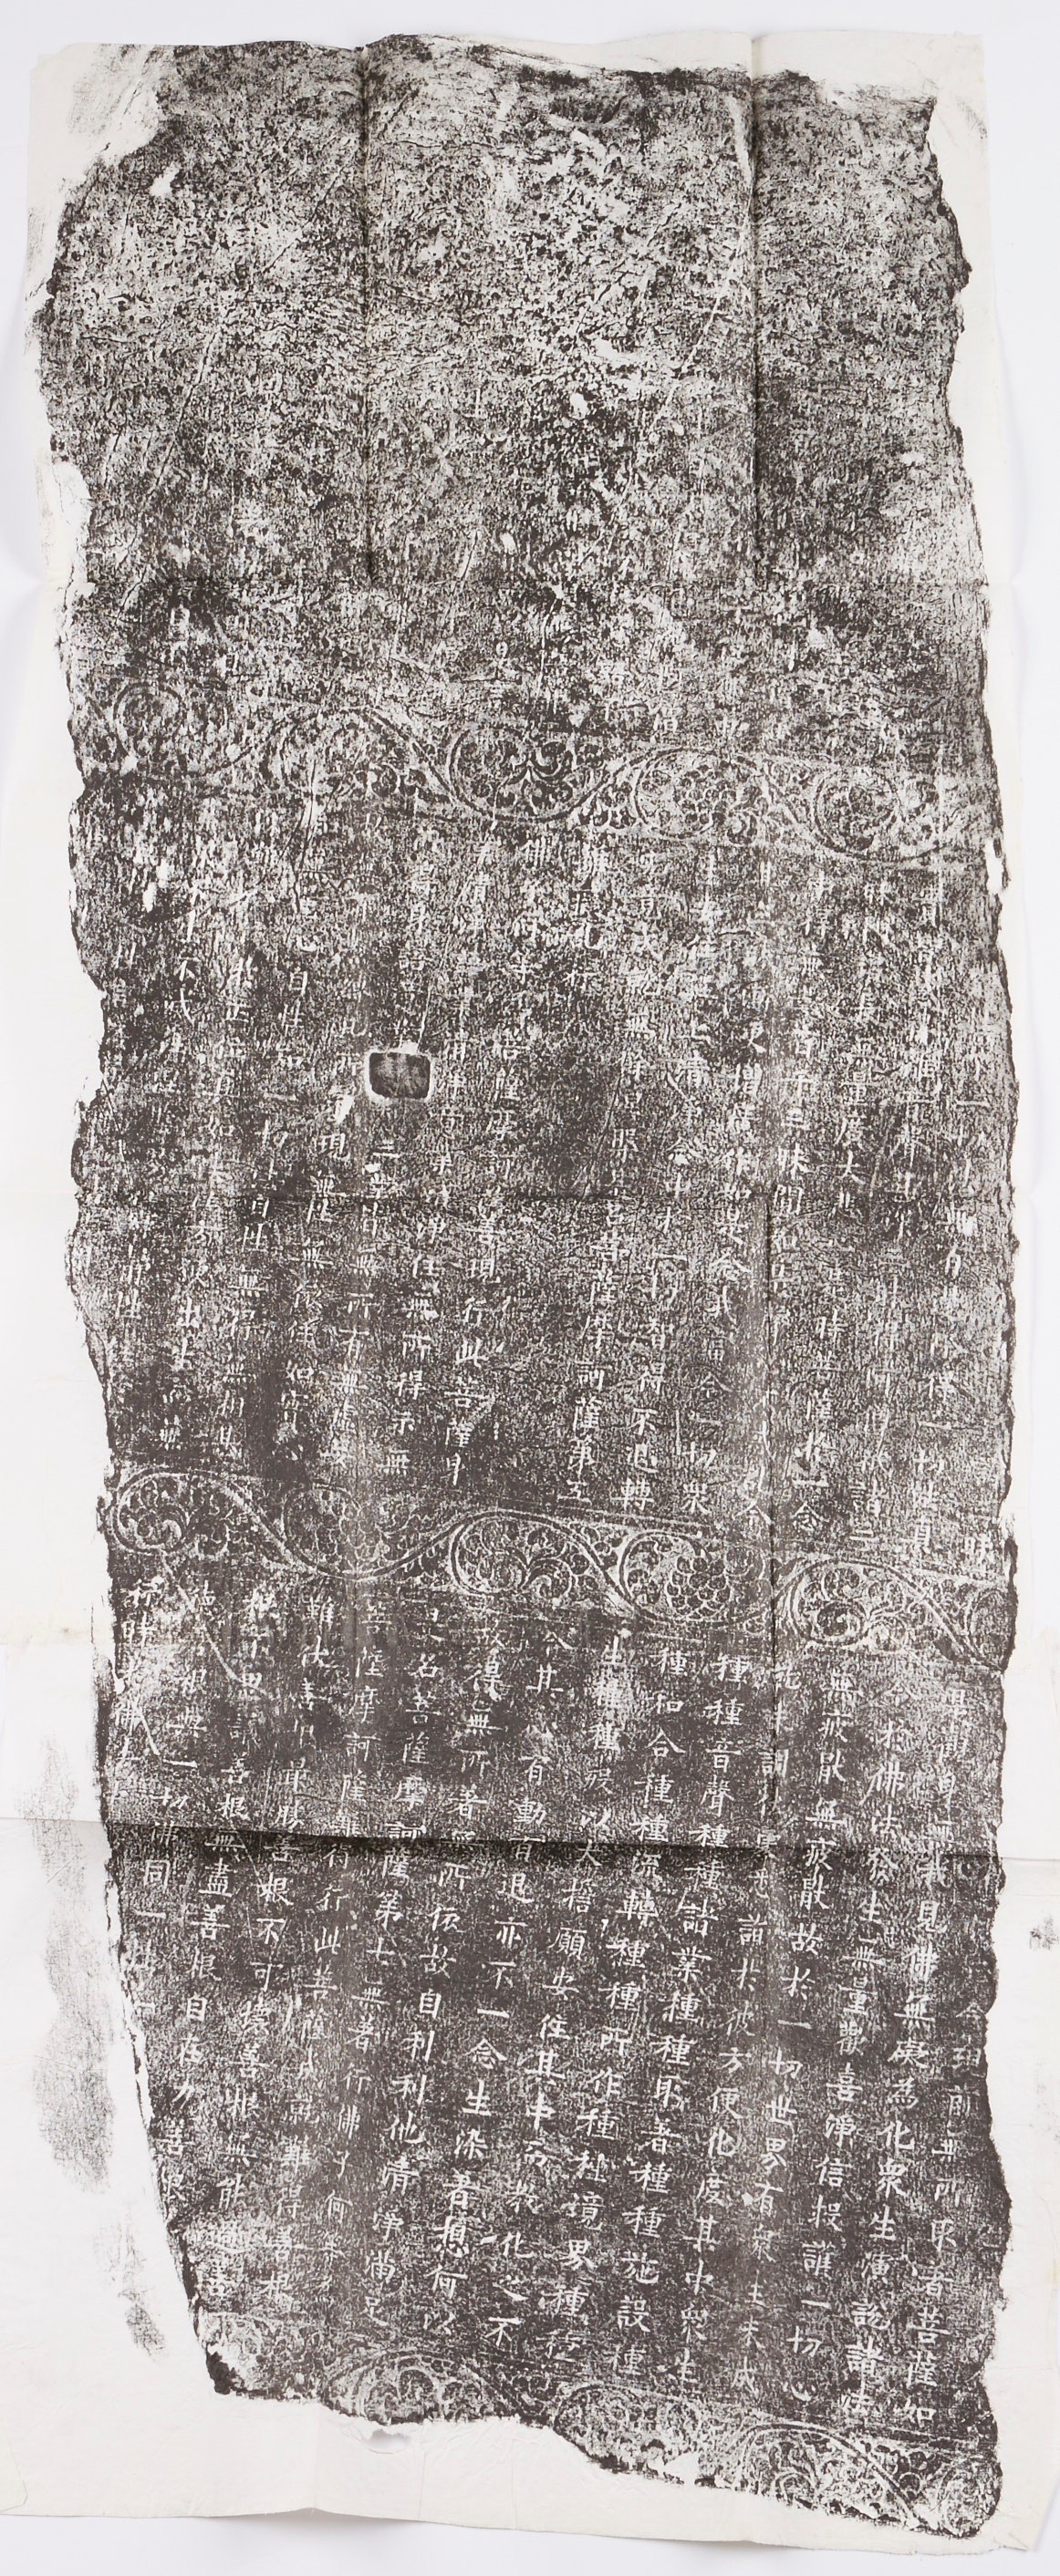 Group of Chinese Buddhist Temple Rubbings - Image 4 of 10